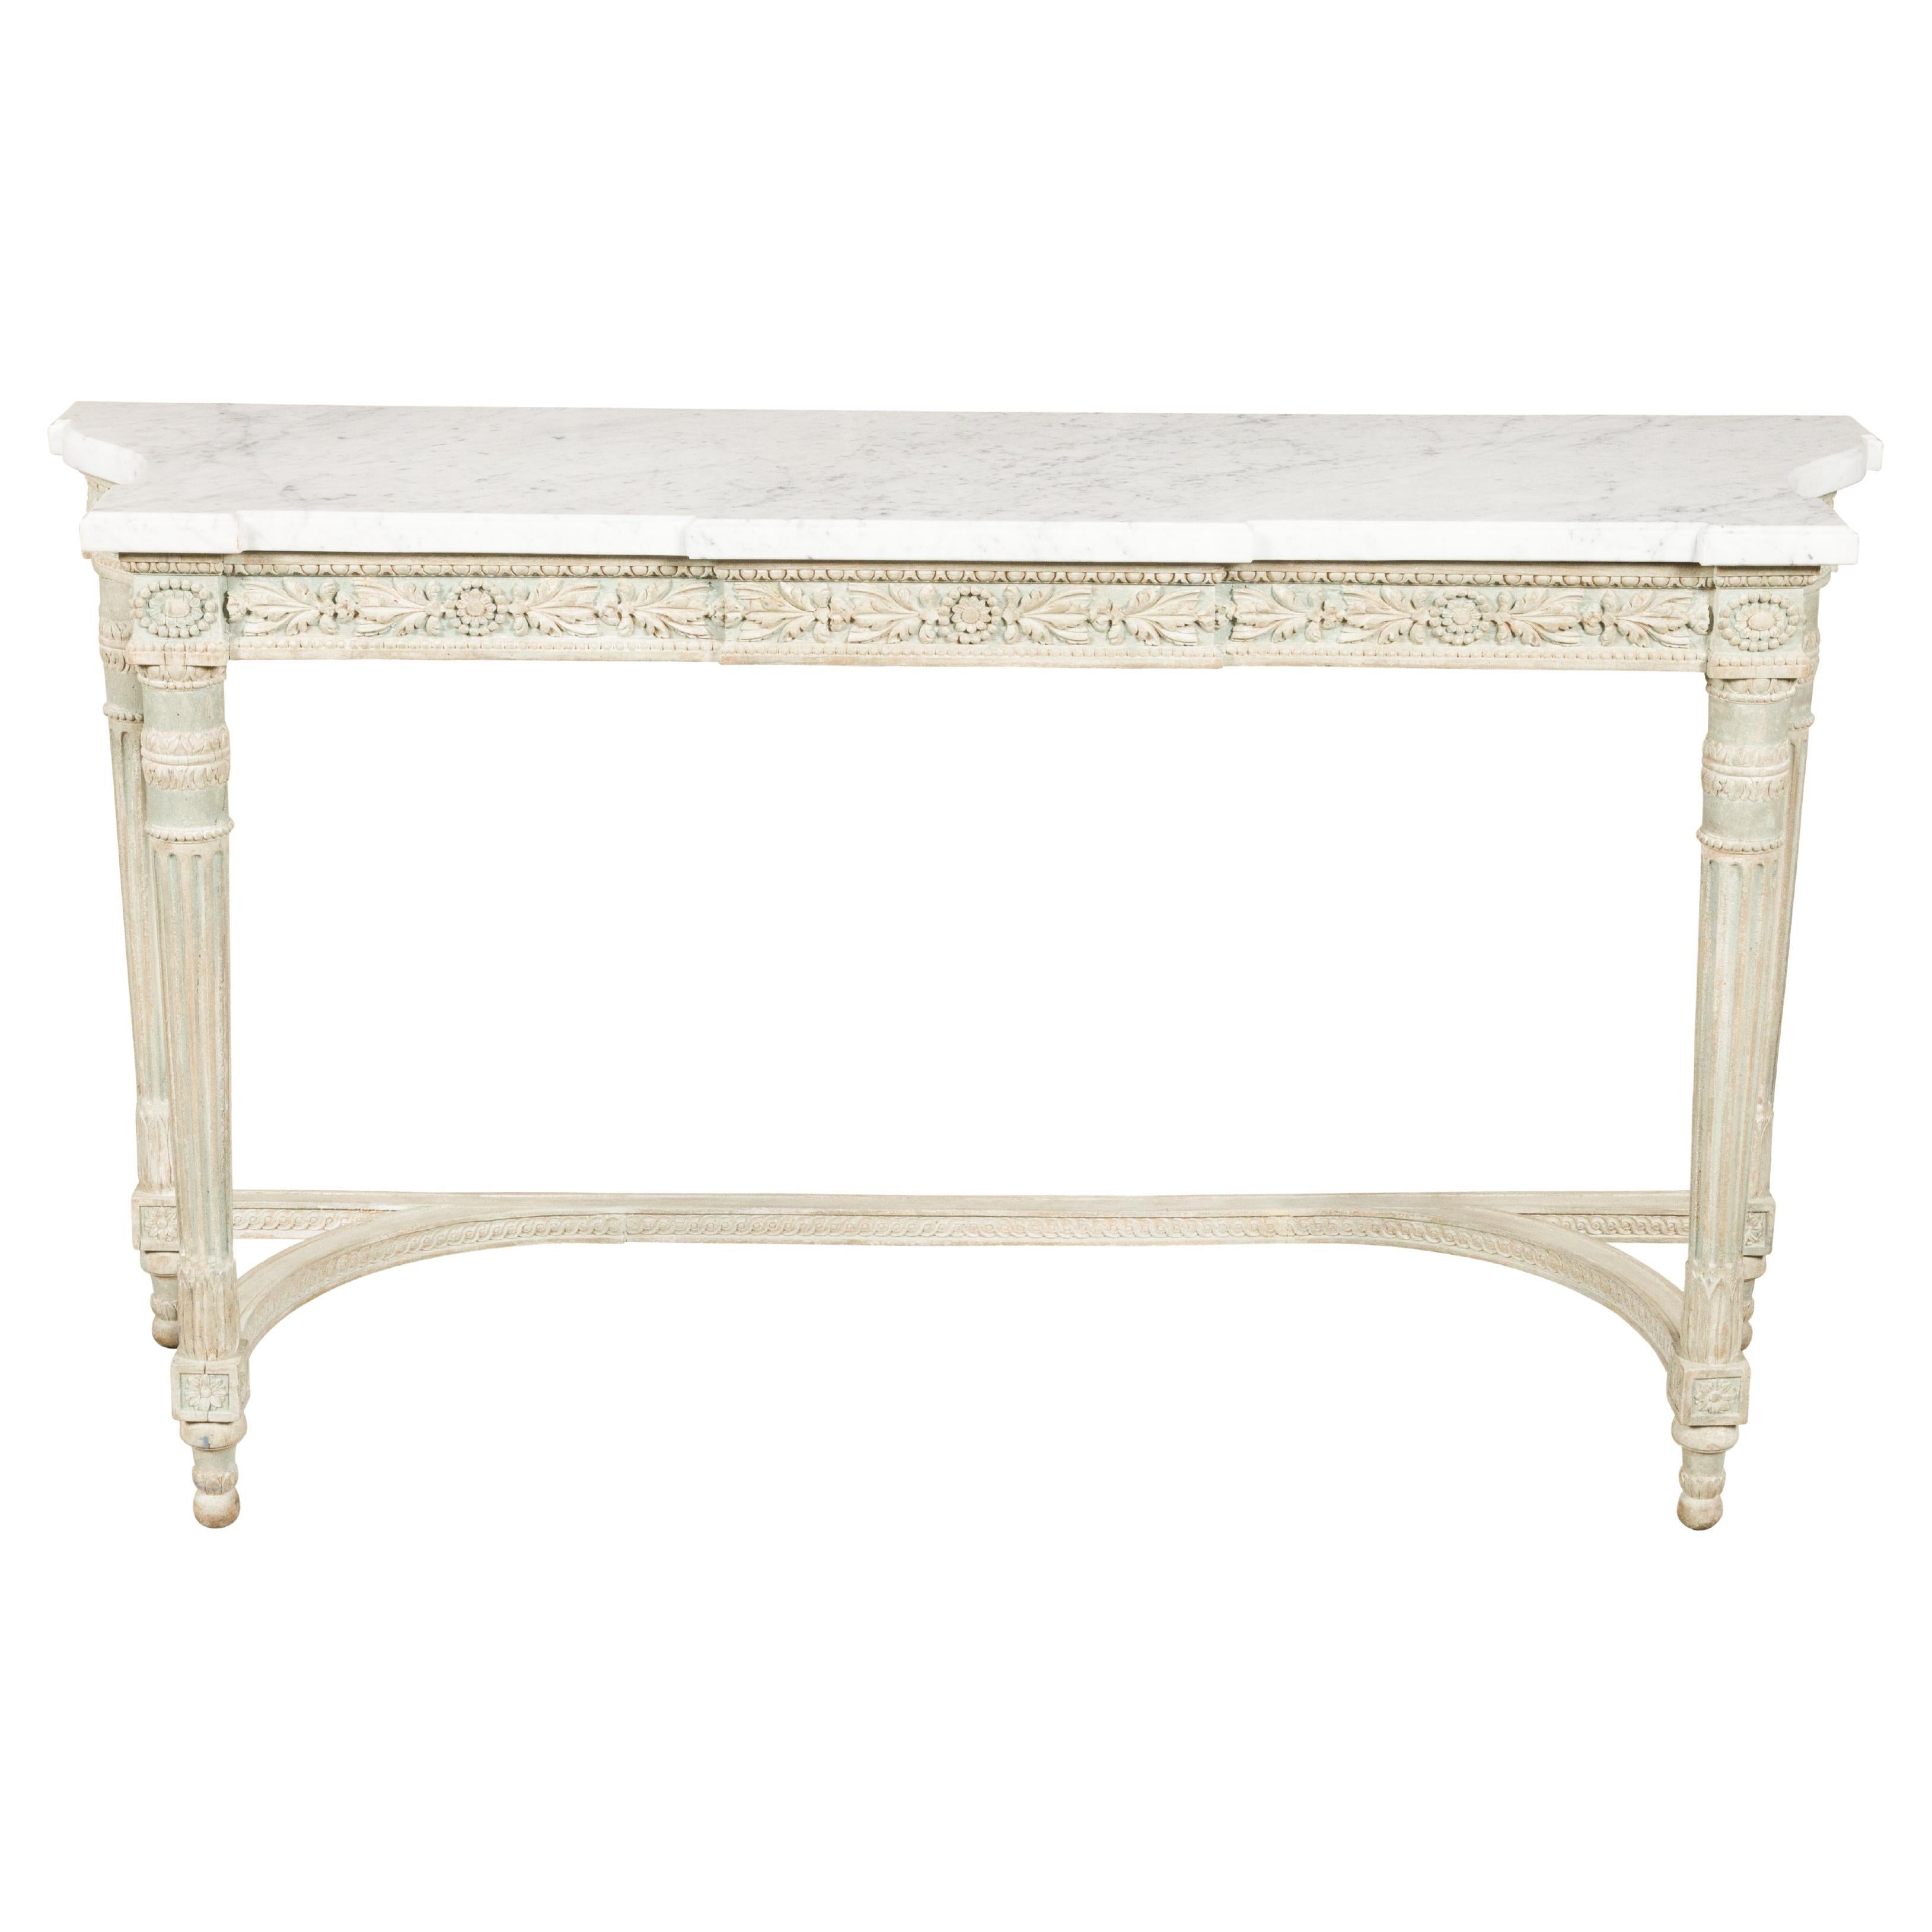 French 19th Century Painted Console Table with Carved Apron and White Marble Top For Sale